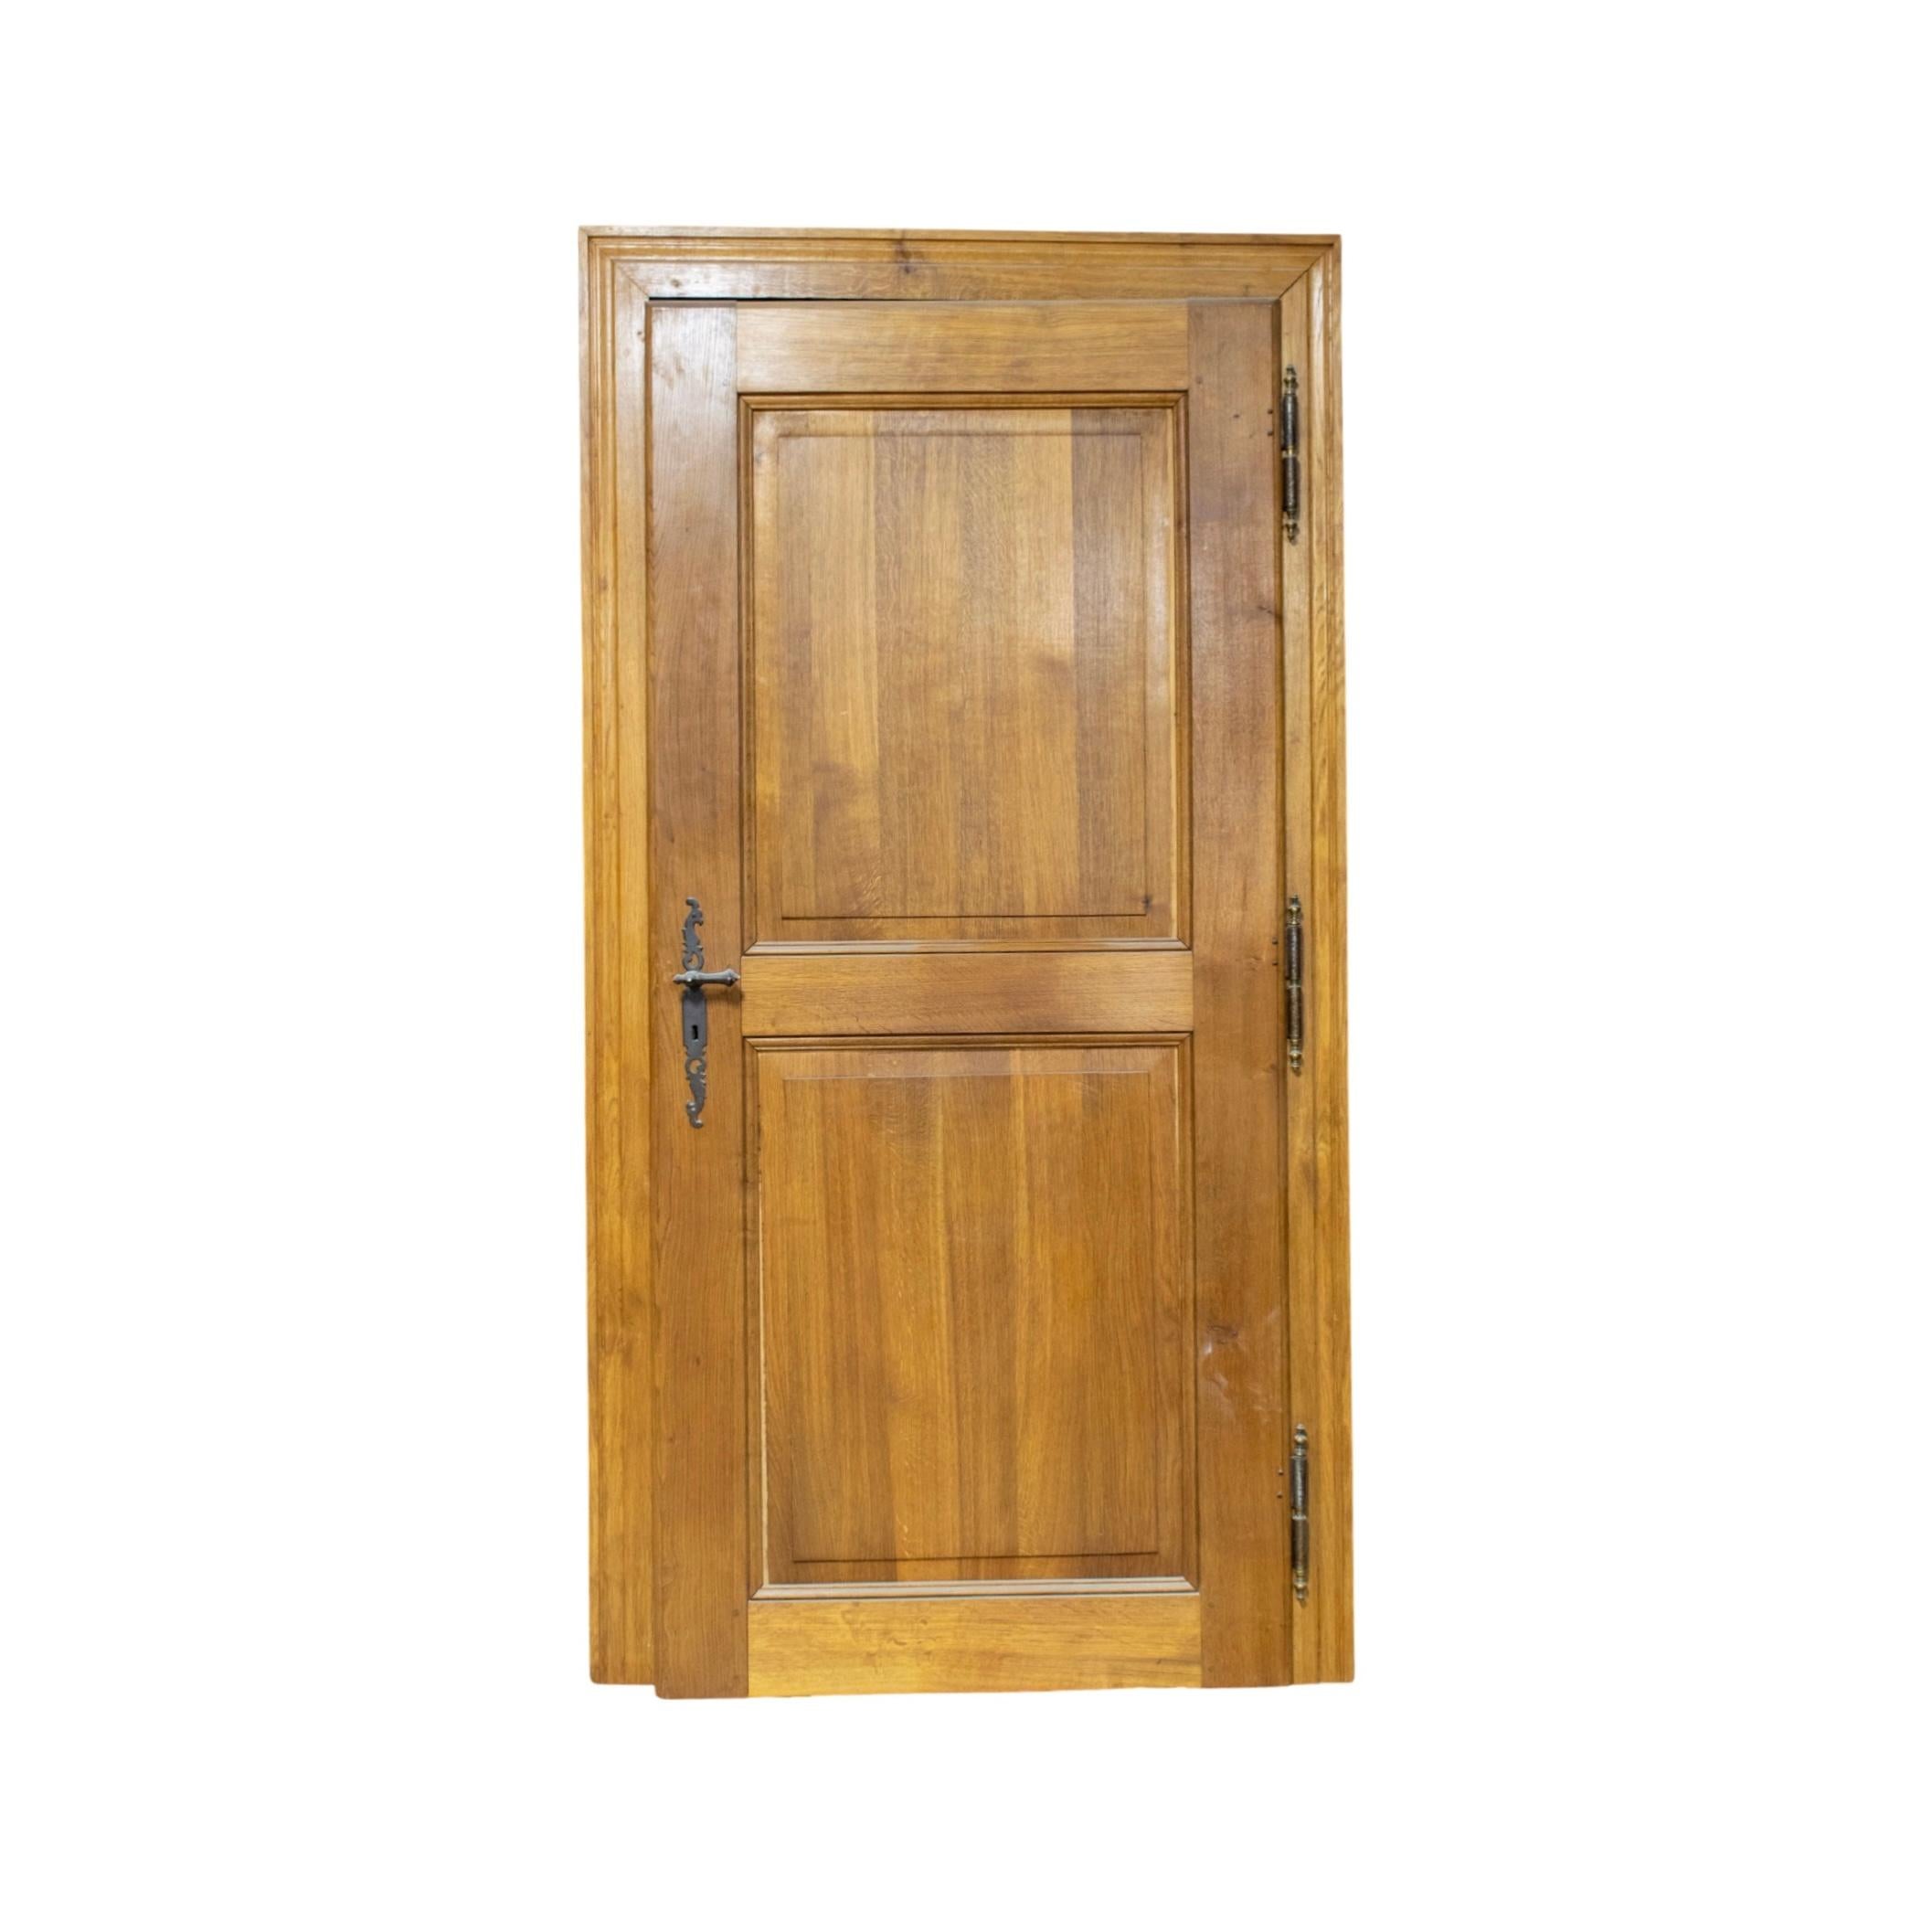 This 19th century French Single Oakwood Framed Door offers a timeless look that will bring character and style to any room. The strong, single door and frame is constructed from solid oakwood, delivering strength and durability. Upgrade your home